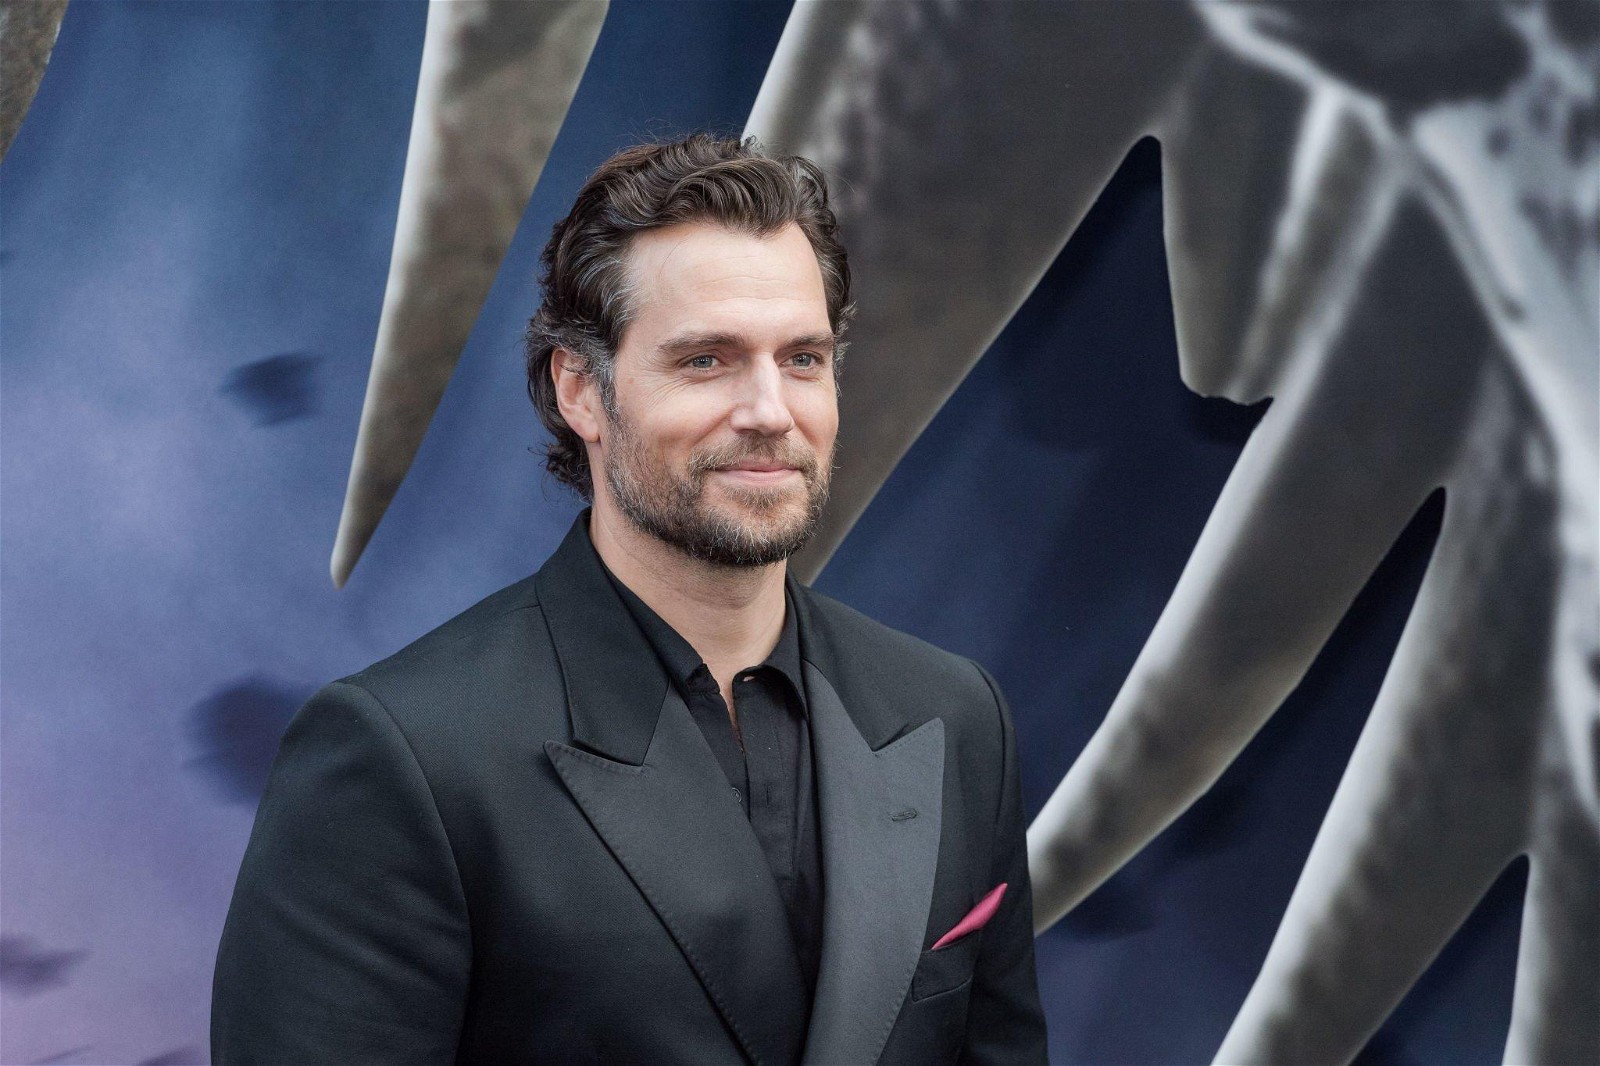 Cavill at the premiere of The Witcher Season 3